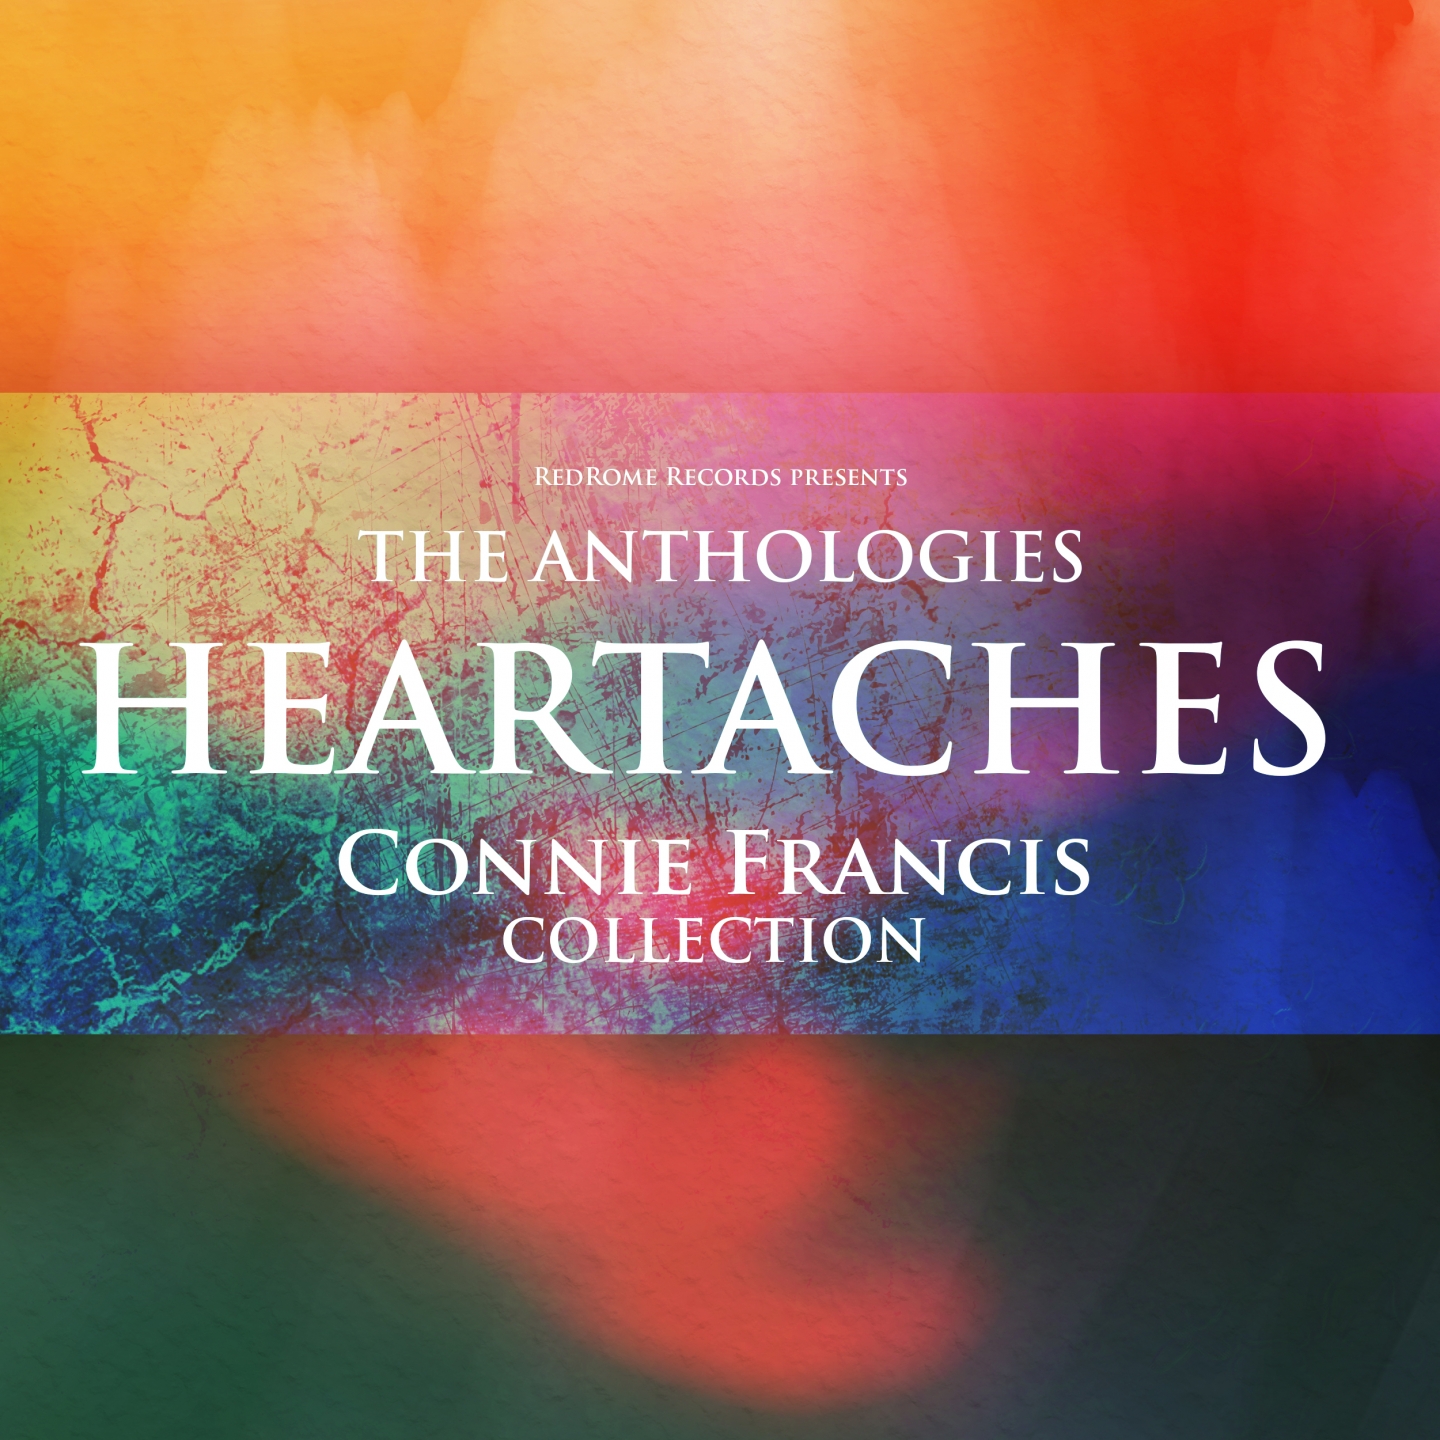 The Anthologies: Heartaches (Connie Francis Collection)